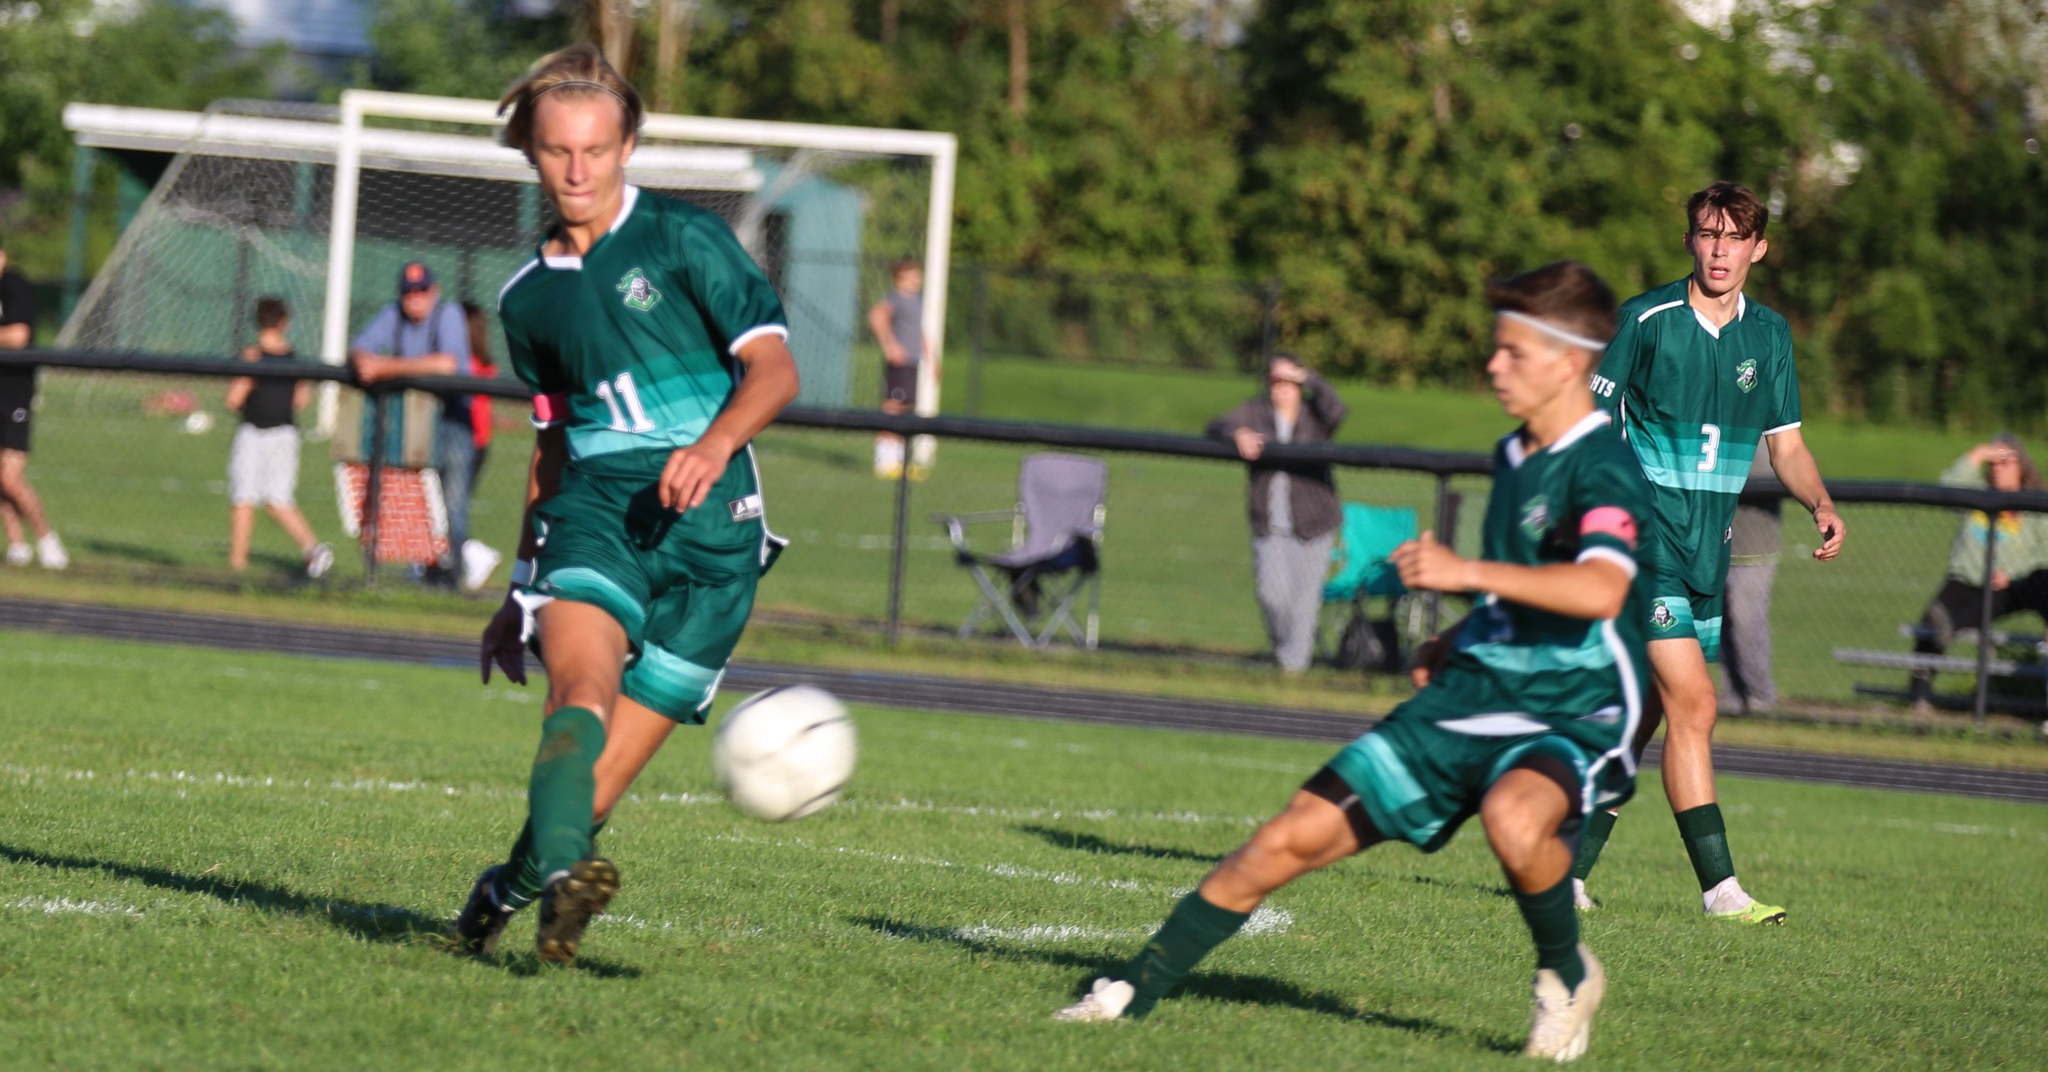 Members of the Middleburgh Varsity Soccer Team in action